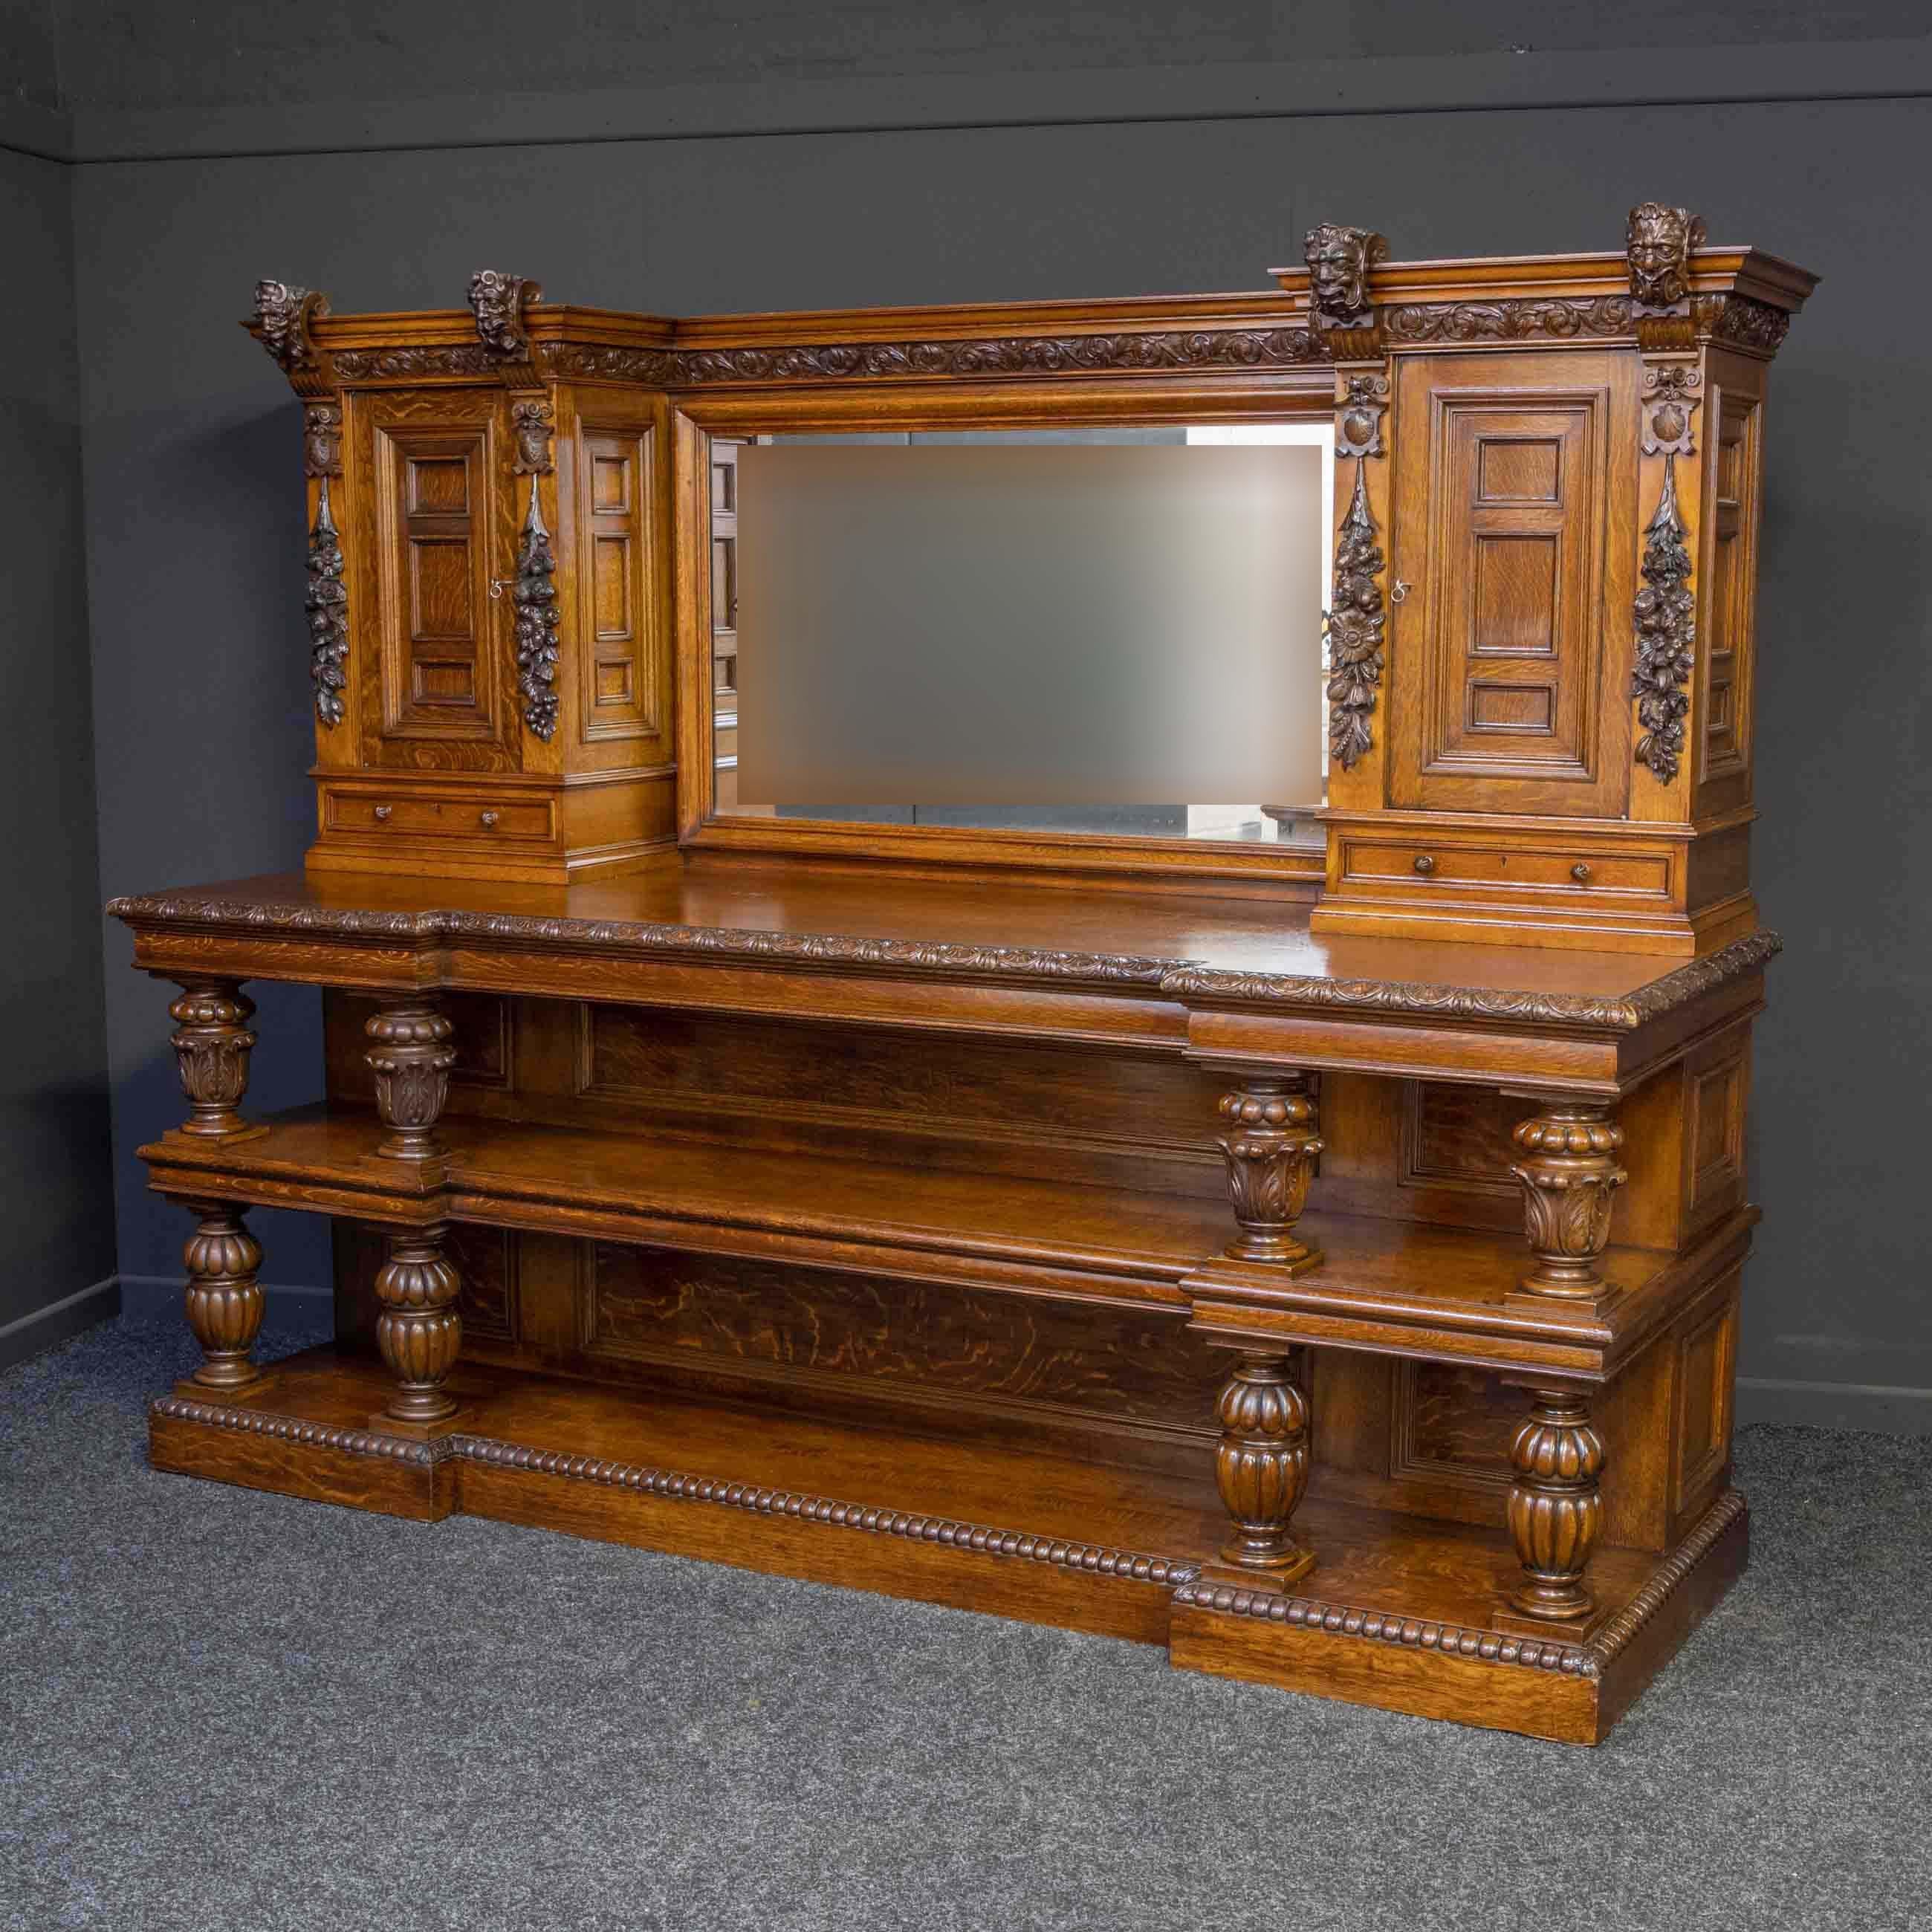 A magnificent solid English oak bar/buffet from the late Victorian period. Purchased by us in the Cotswolds and with possible connections to the historic Bullingdon Cricket Club. Of superb quality and extremely heavy although it does significantly